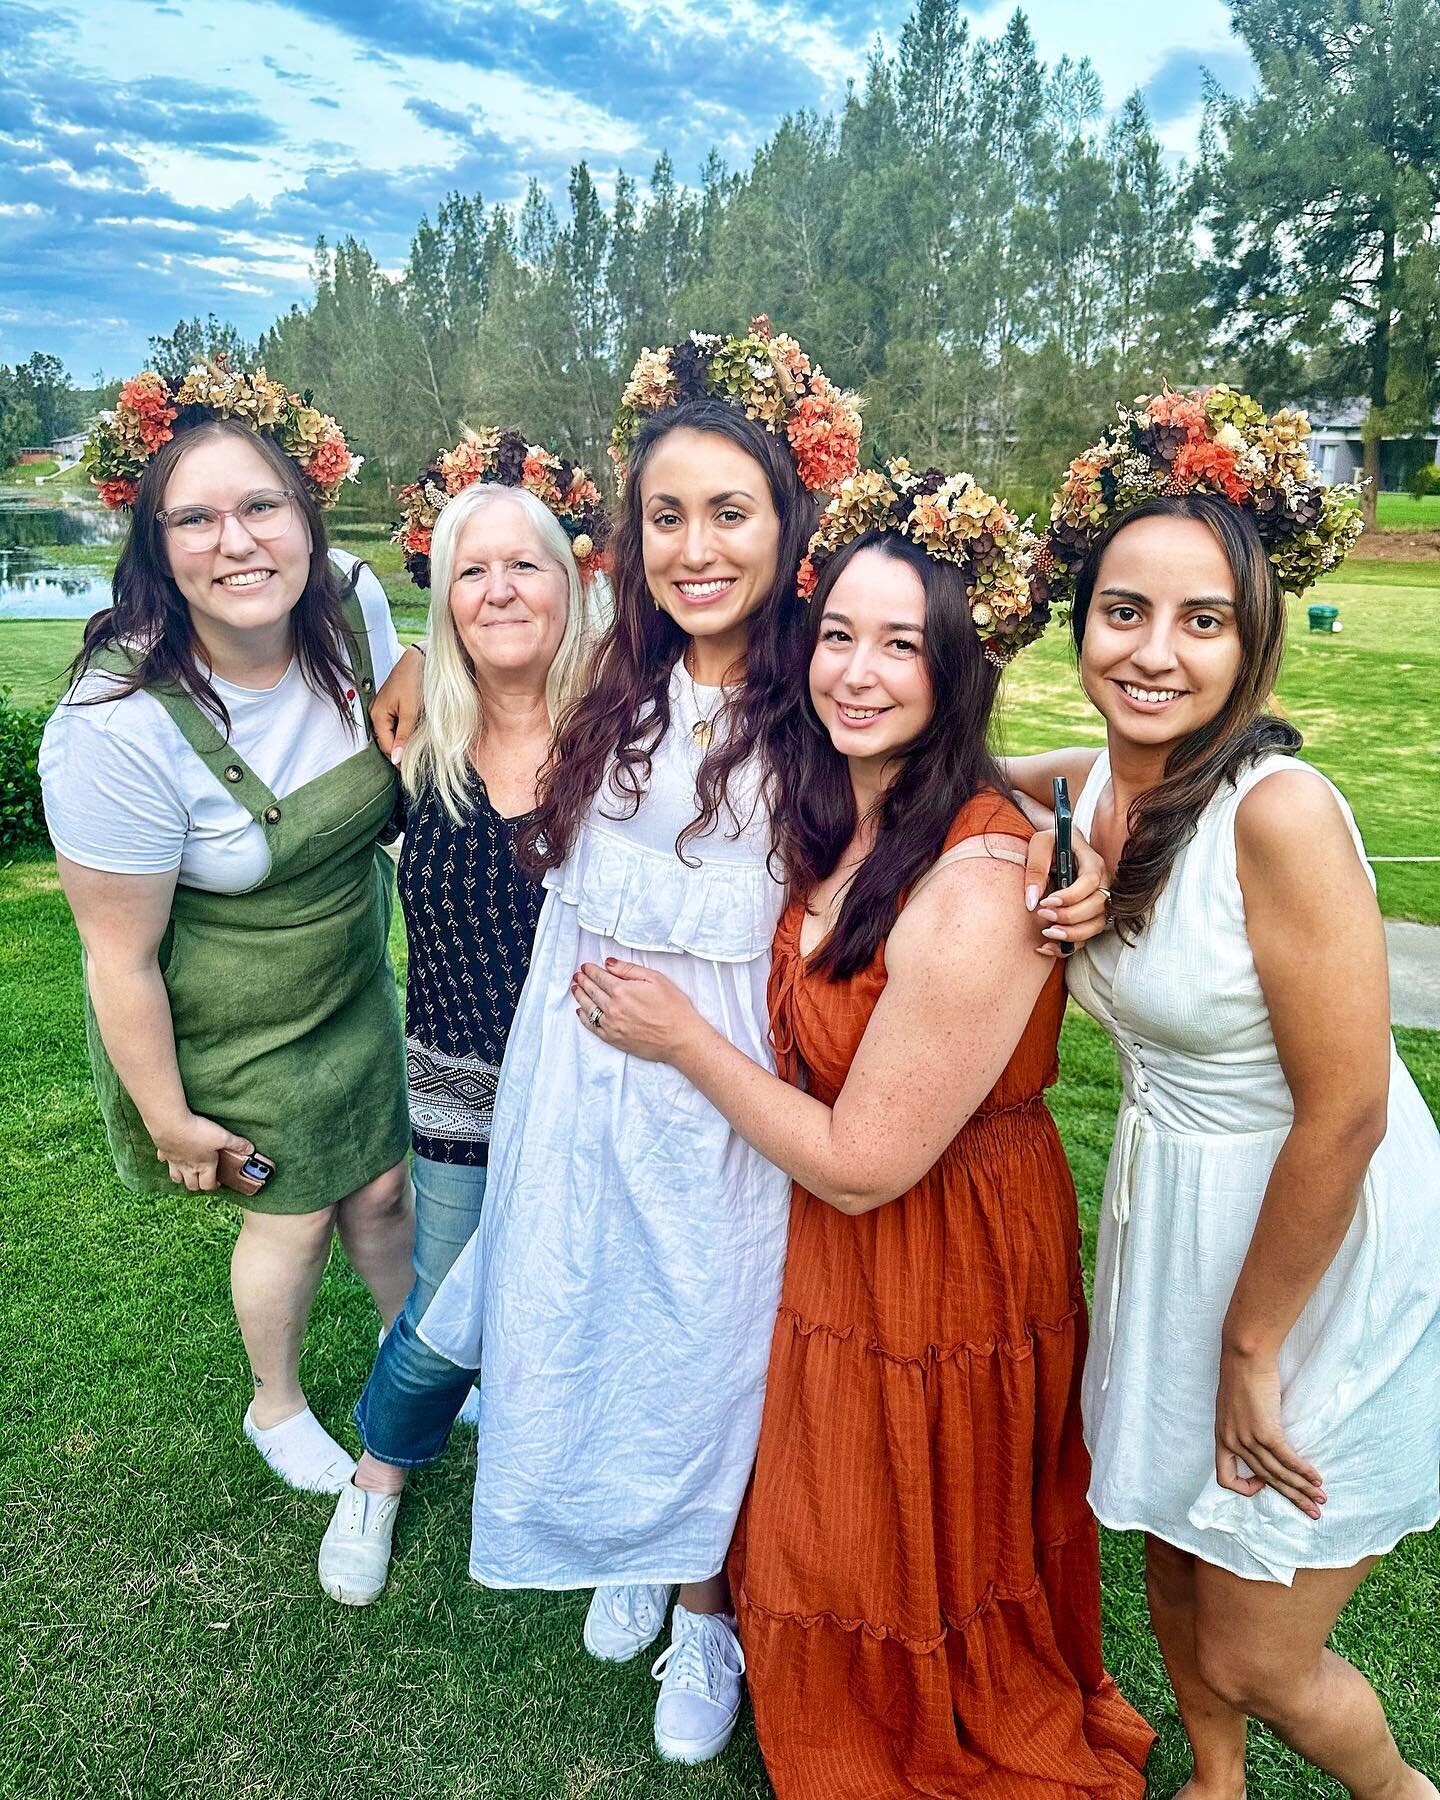 Hey Queens, listen up! The Flower Creative isn't just your regular ol' flower shop - it's a full-blown experience, fit for a queen! 

We offer mobile flower crown making, flower arranging and floral wreath making. And you know what they say, a selfie